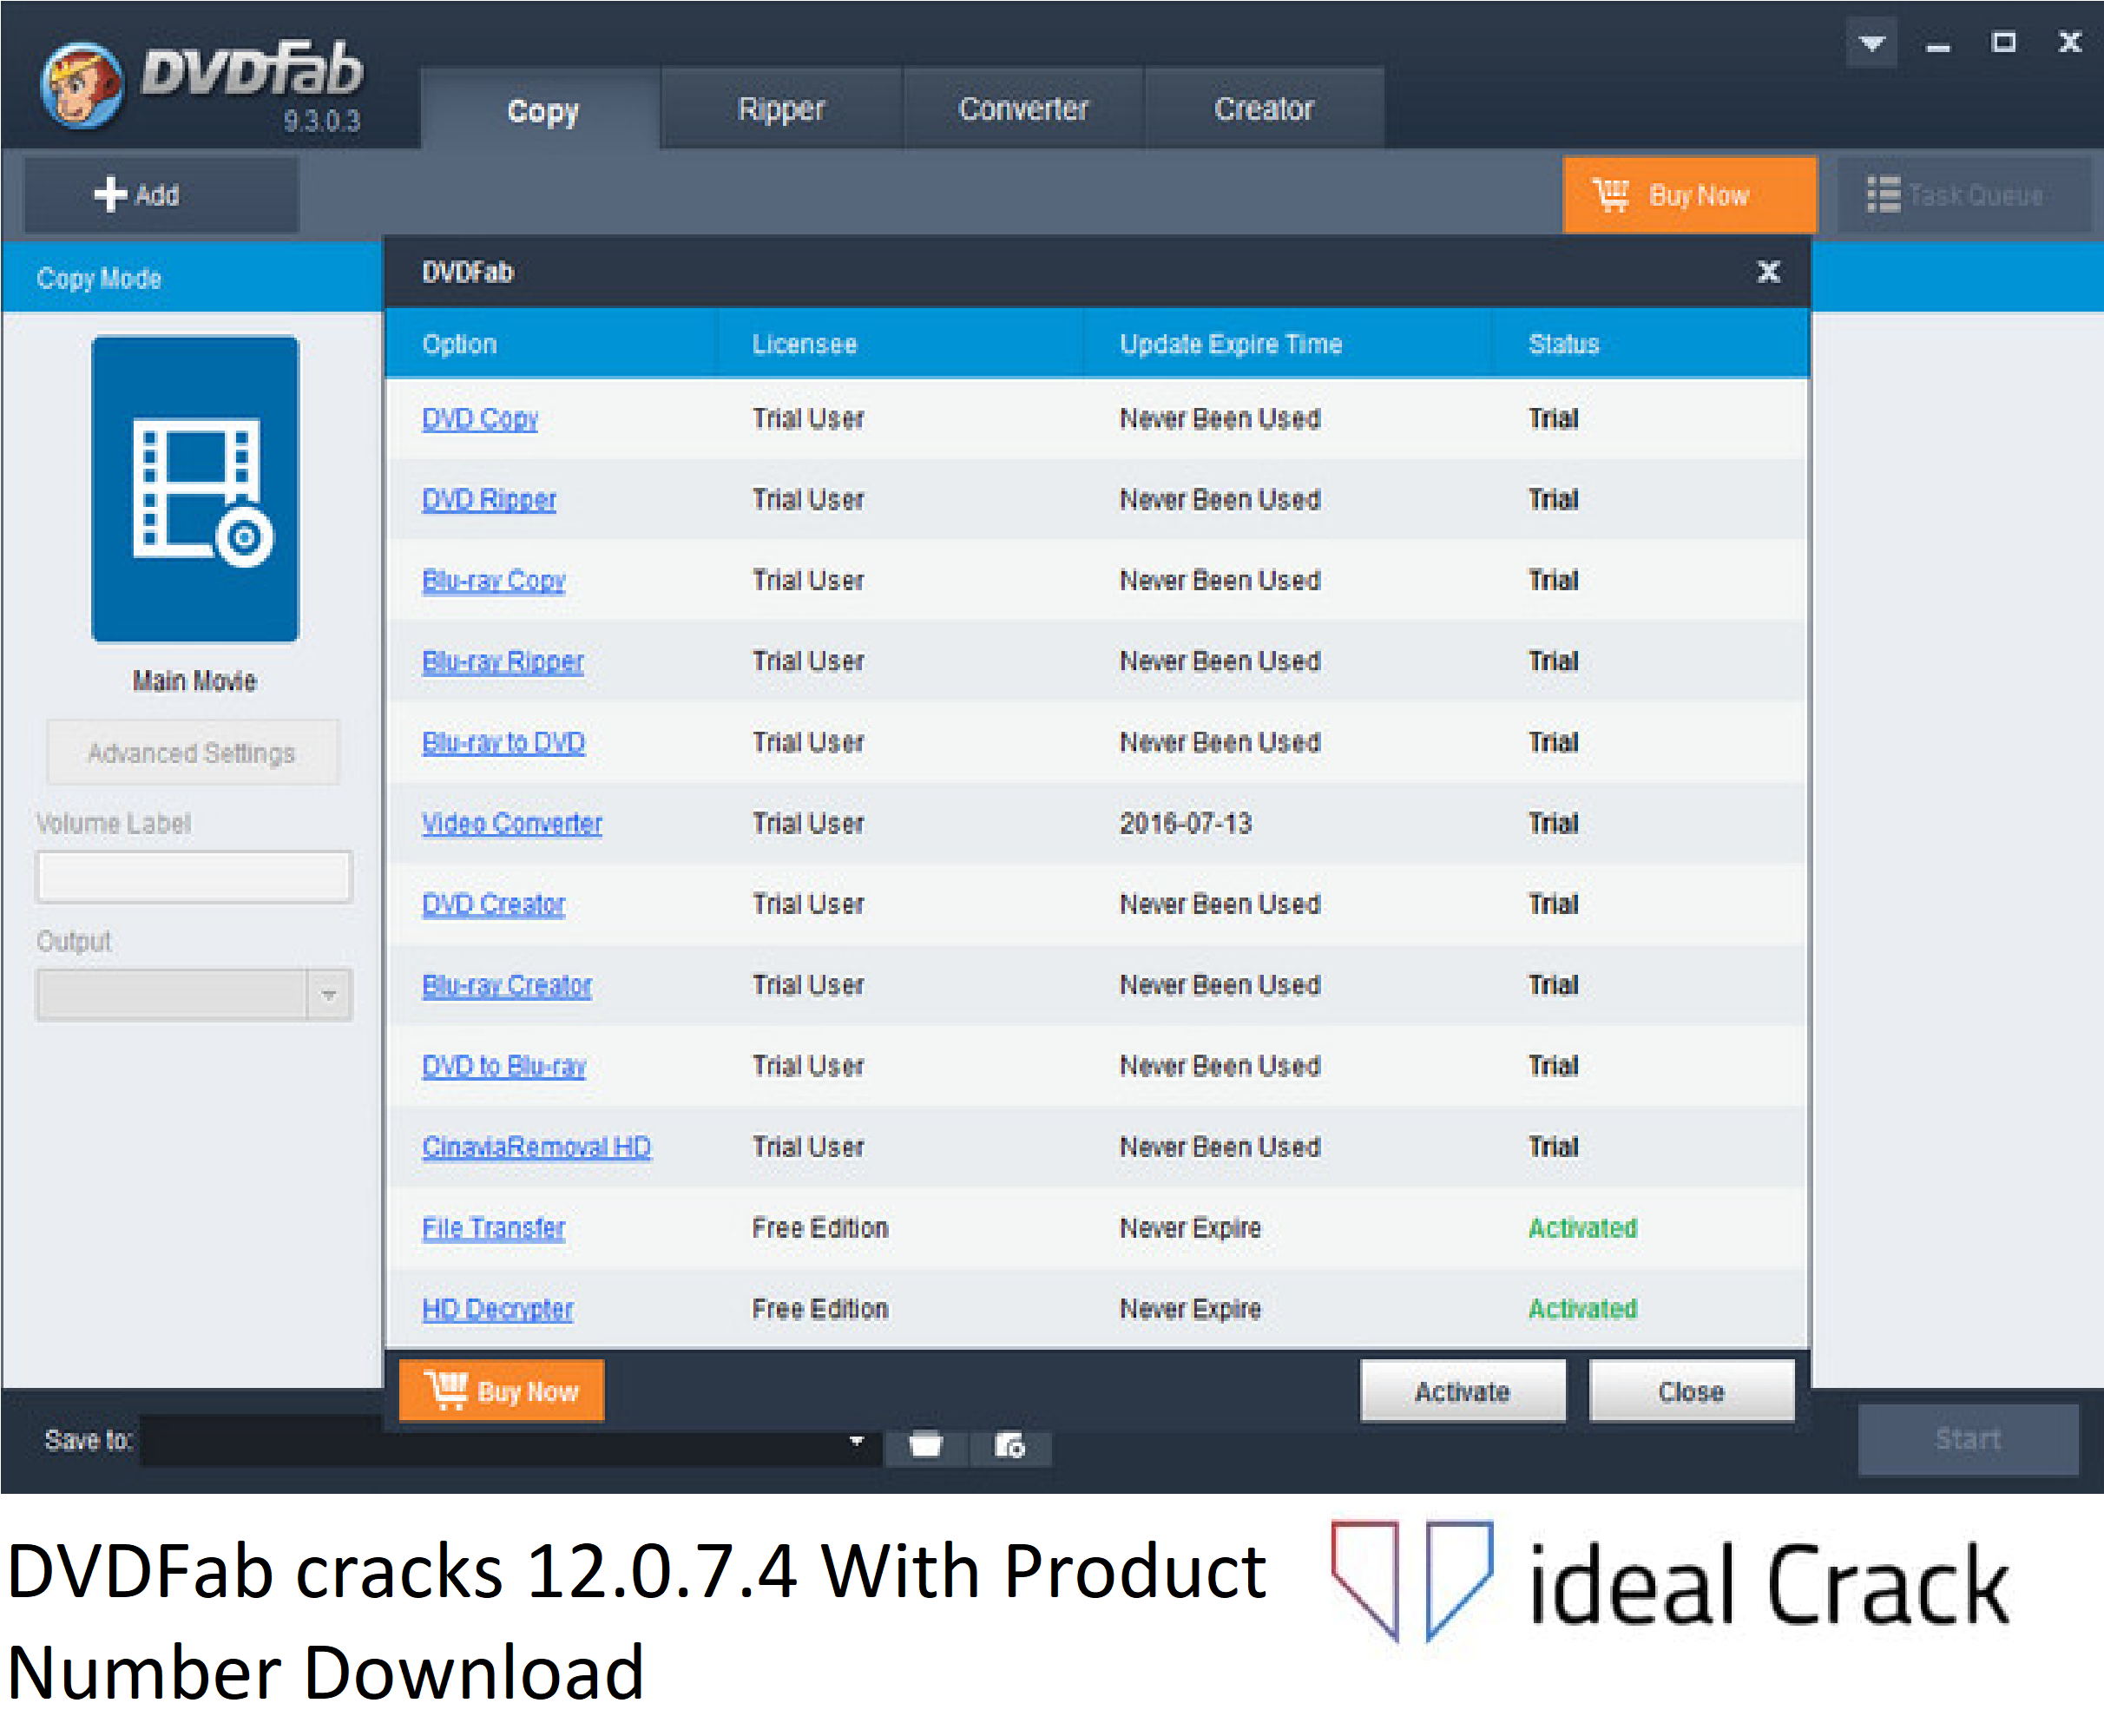 DVDFab cracks 12.0.7.4 With Product Number Download